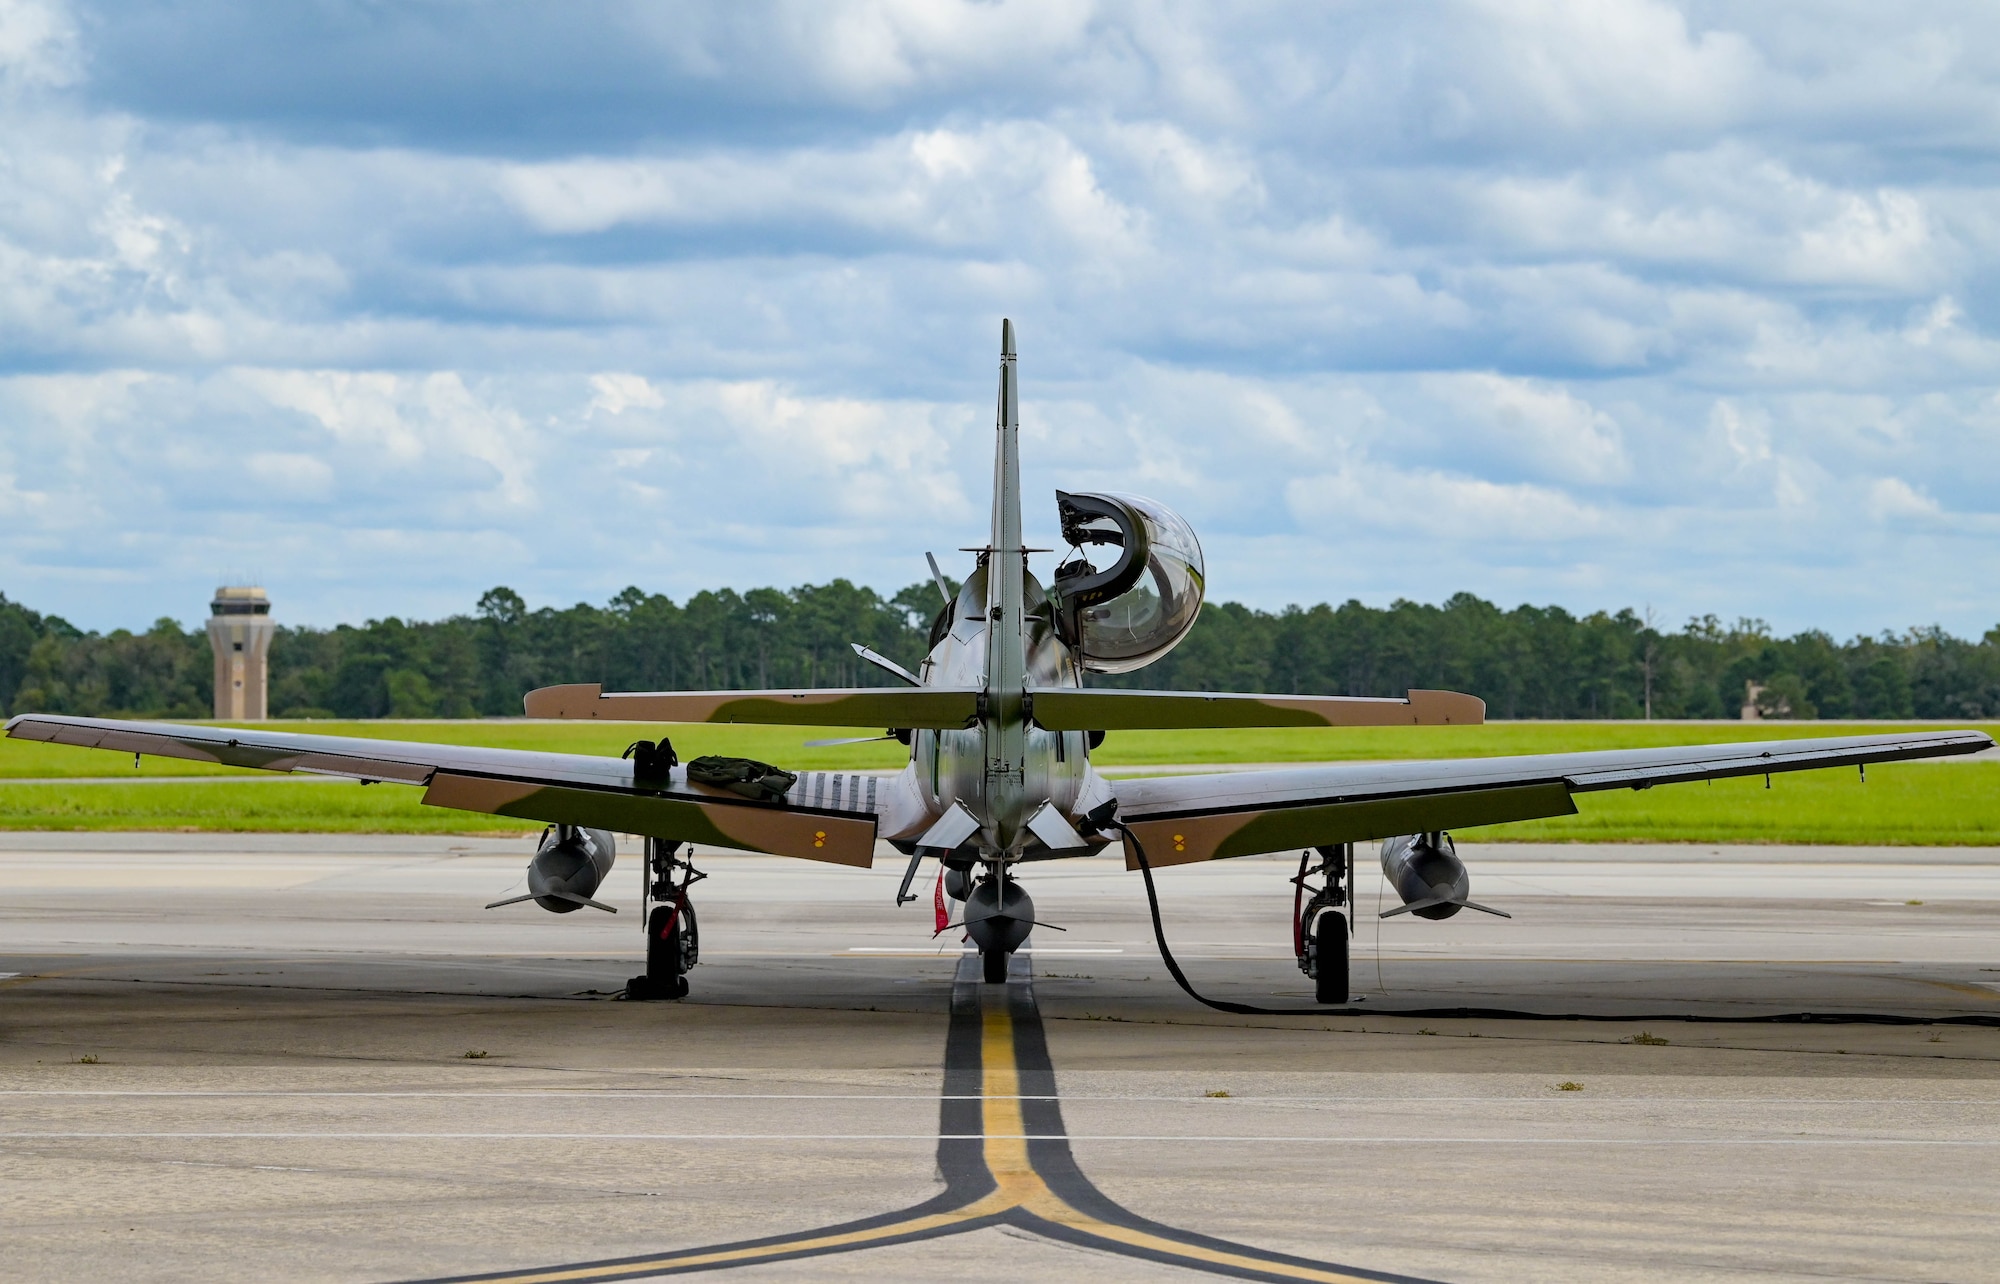 An A-29 Super Tucano aircraft is prepared for departure at Moody Air Force Base, Georgia, Sept. 15, 2021. The Department of Defense made the purchase agreement in 2018. The aircraft will be transported to Kainji Air Base, Nigeria, where it will serve the NAF for future operations. (U.S. Air Force photo by Senior Airman Rebeckah Medeiros)